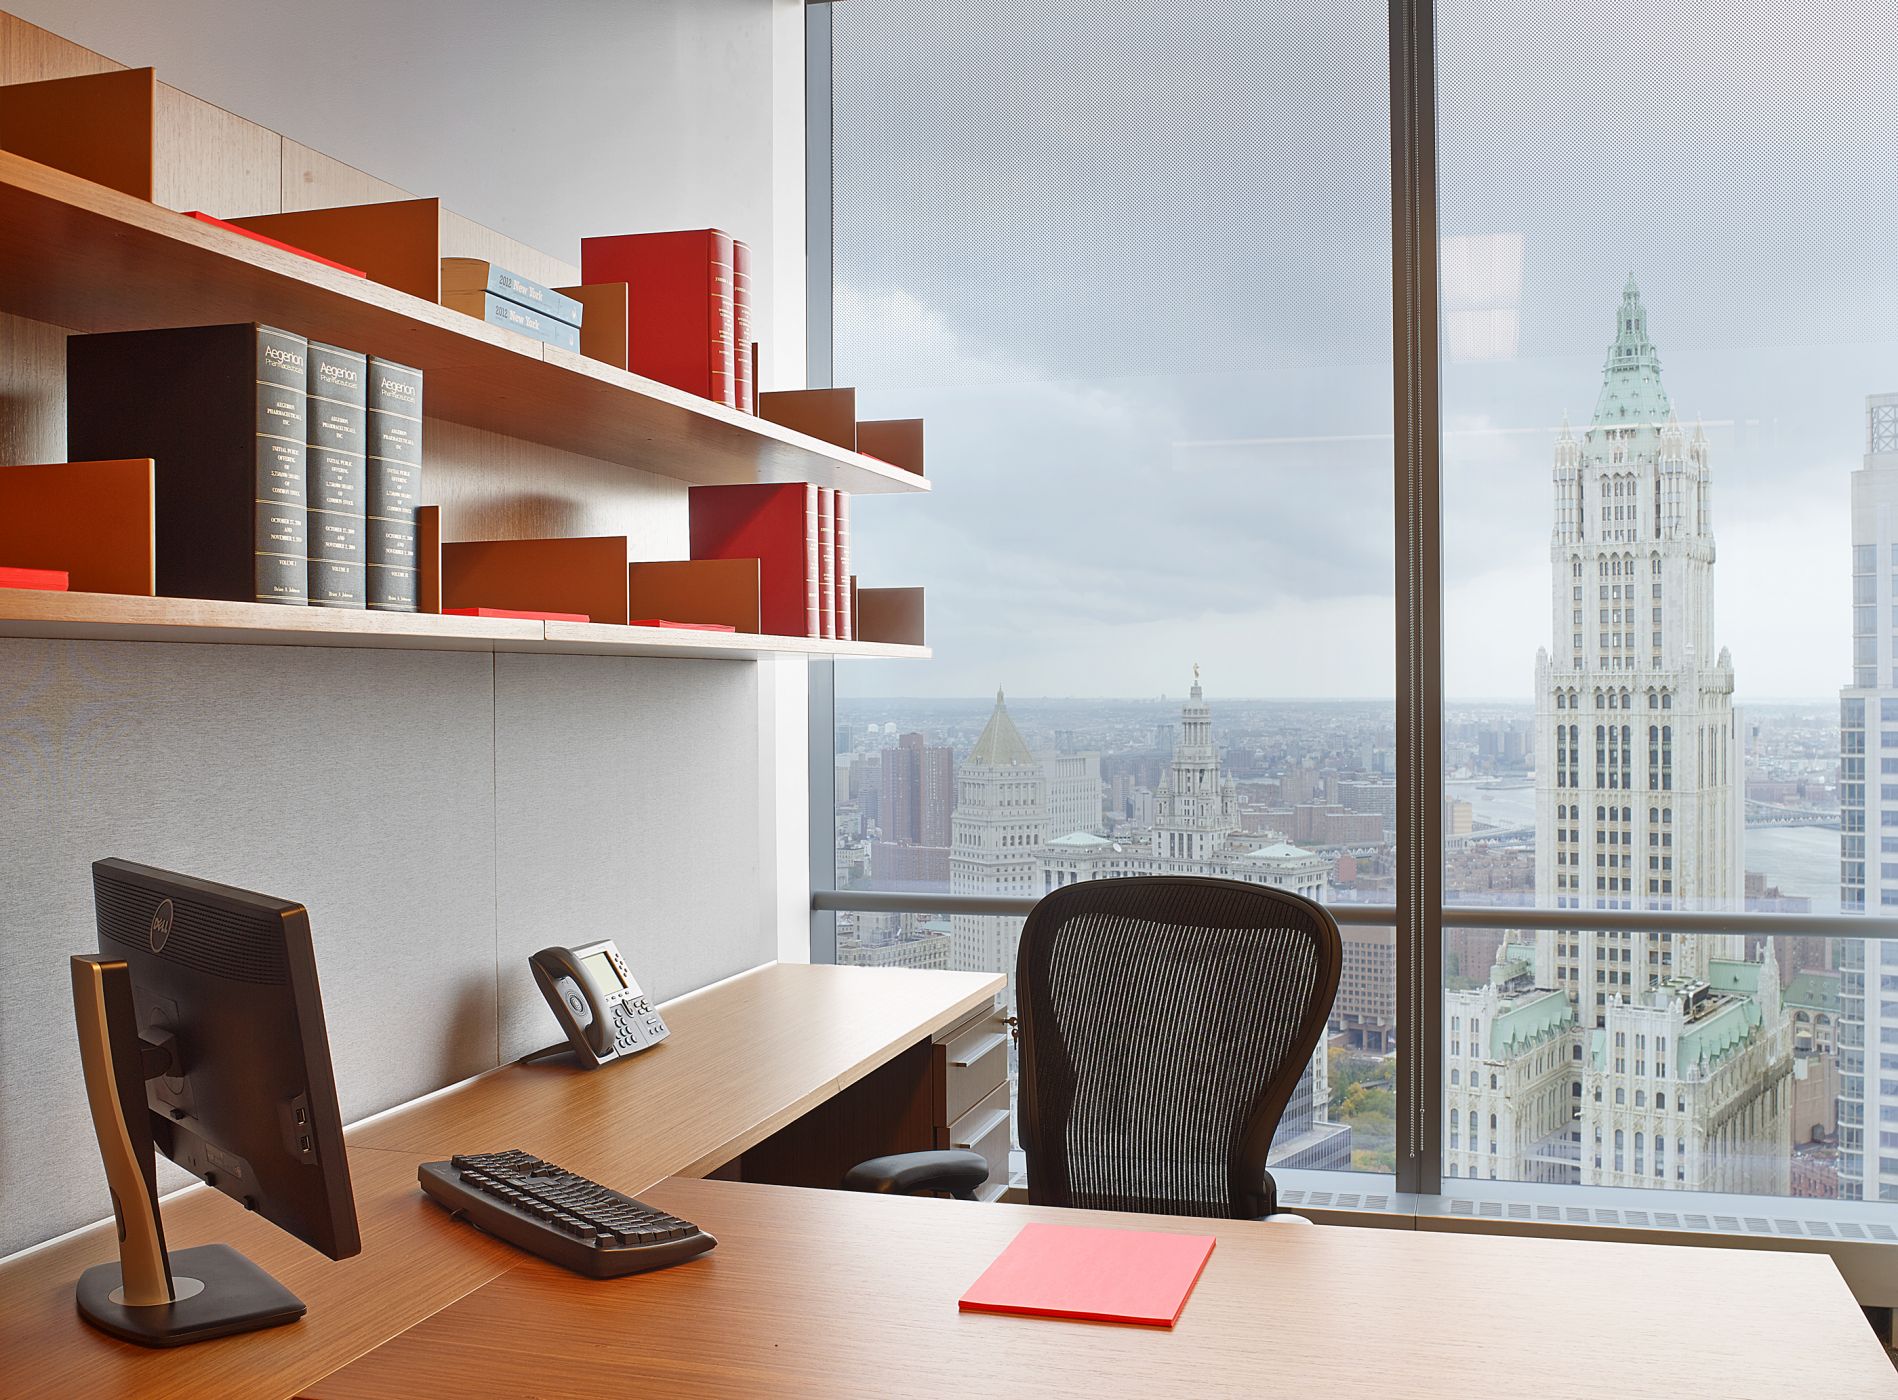 Associate offices feature  floating open shelves.